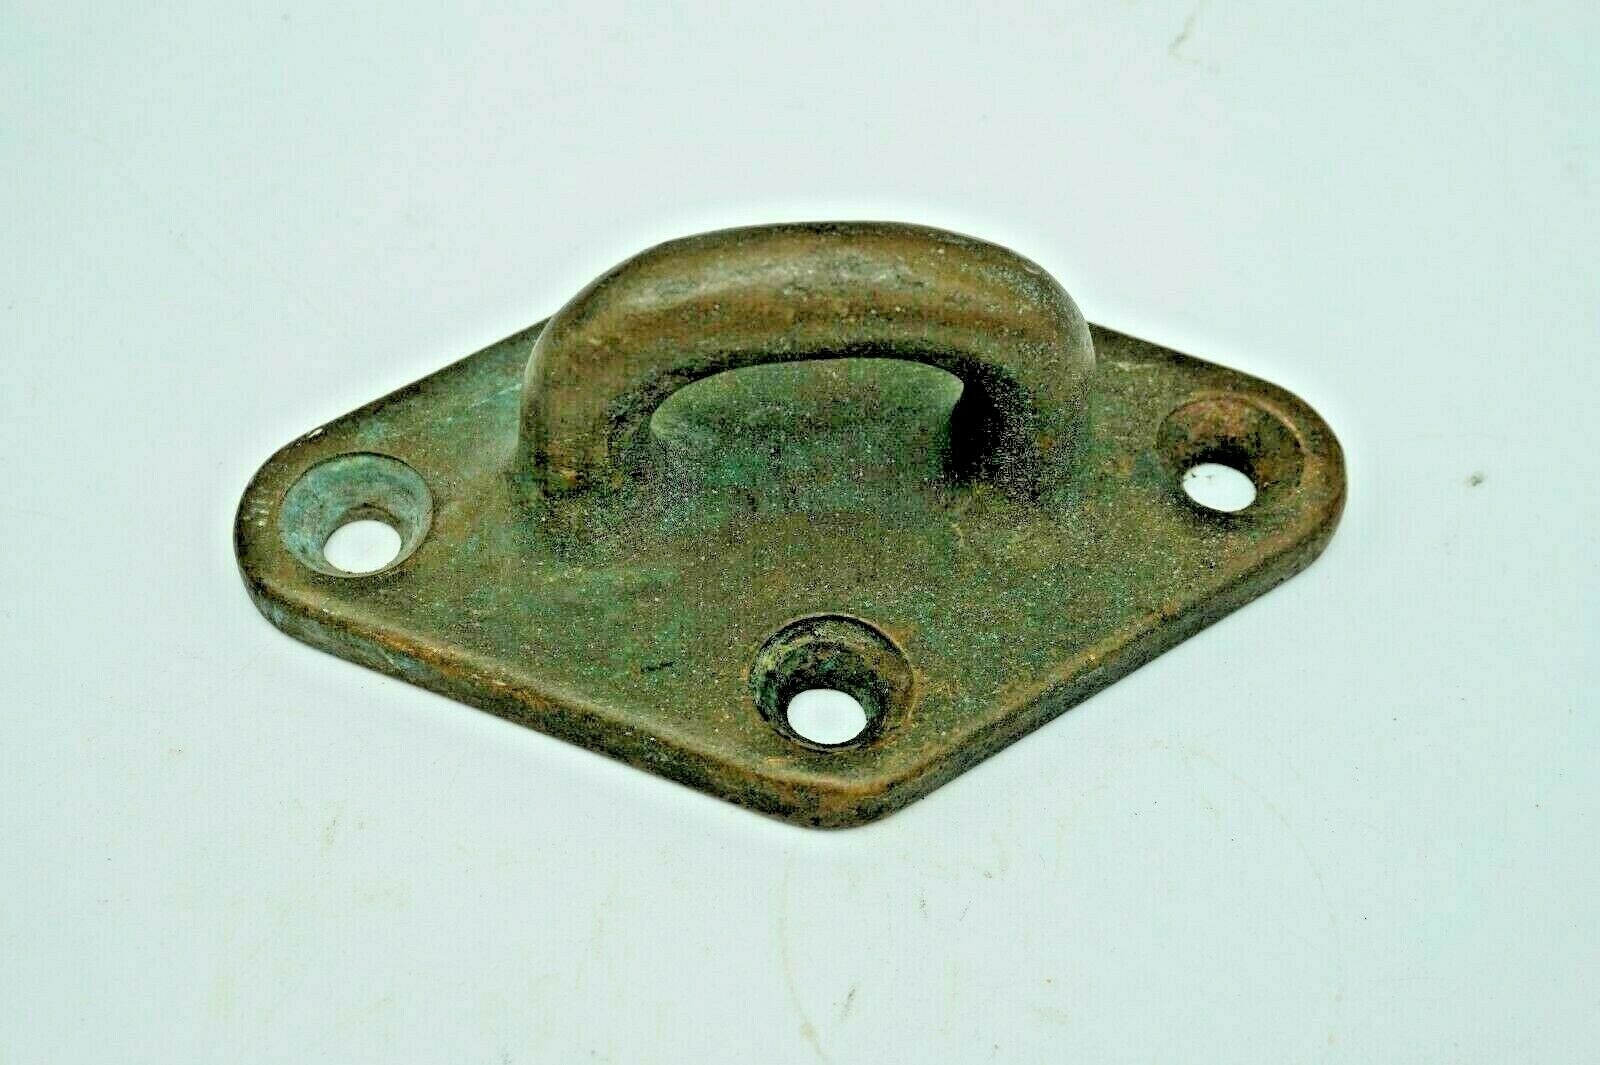 Antique Heavy Duty Boat Sailboat Dock Cleat Hook Rope Tie Down Docking !!